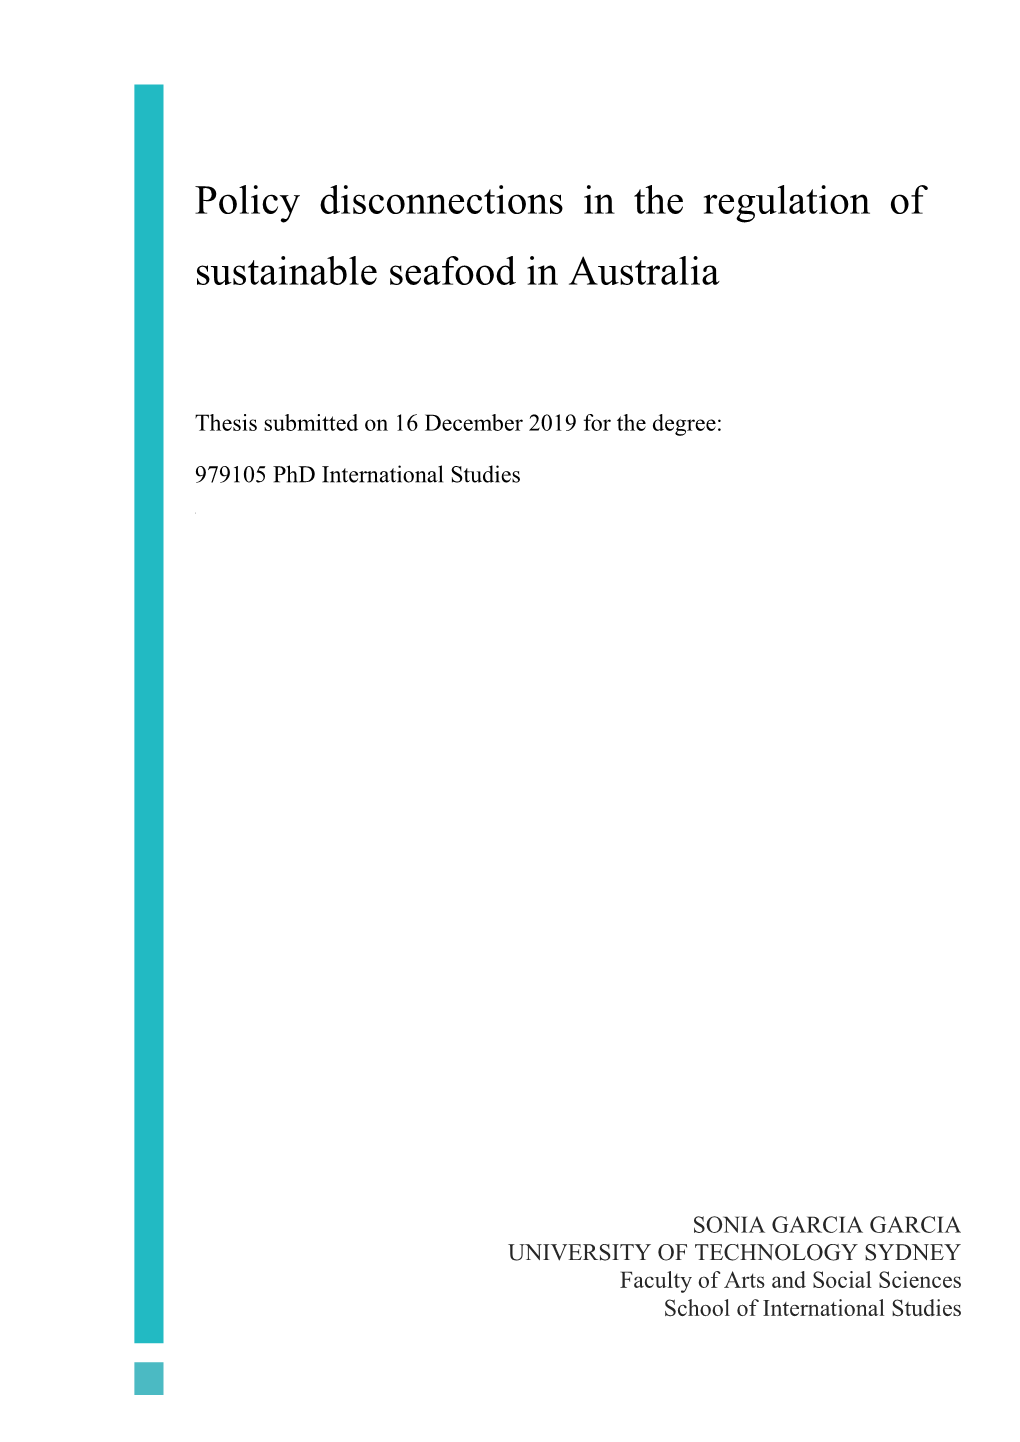 Policy Disconnections in the Regulation of Sustainable Seafood in Australia